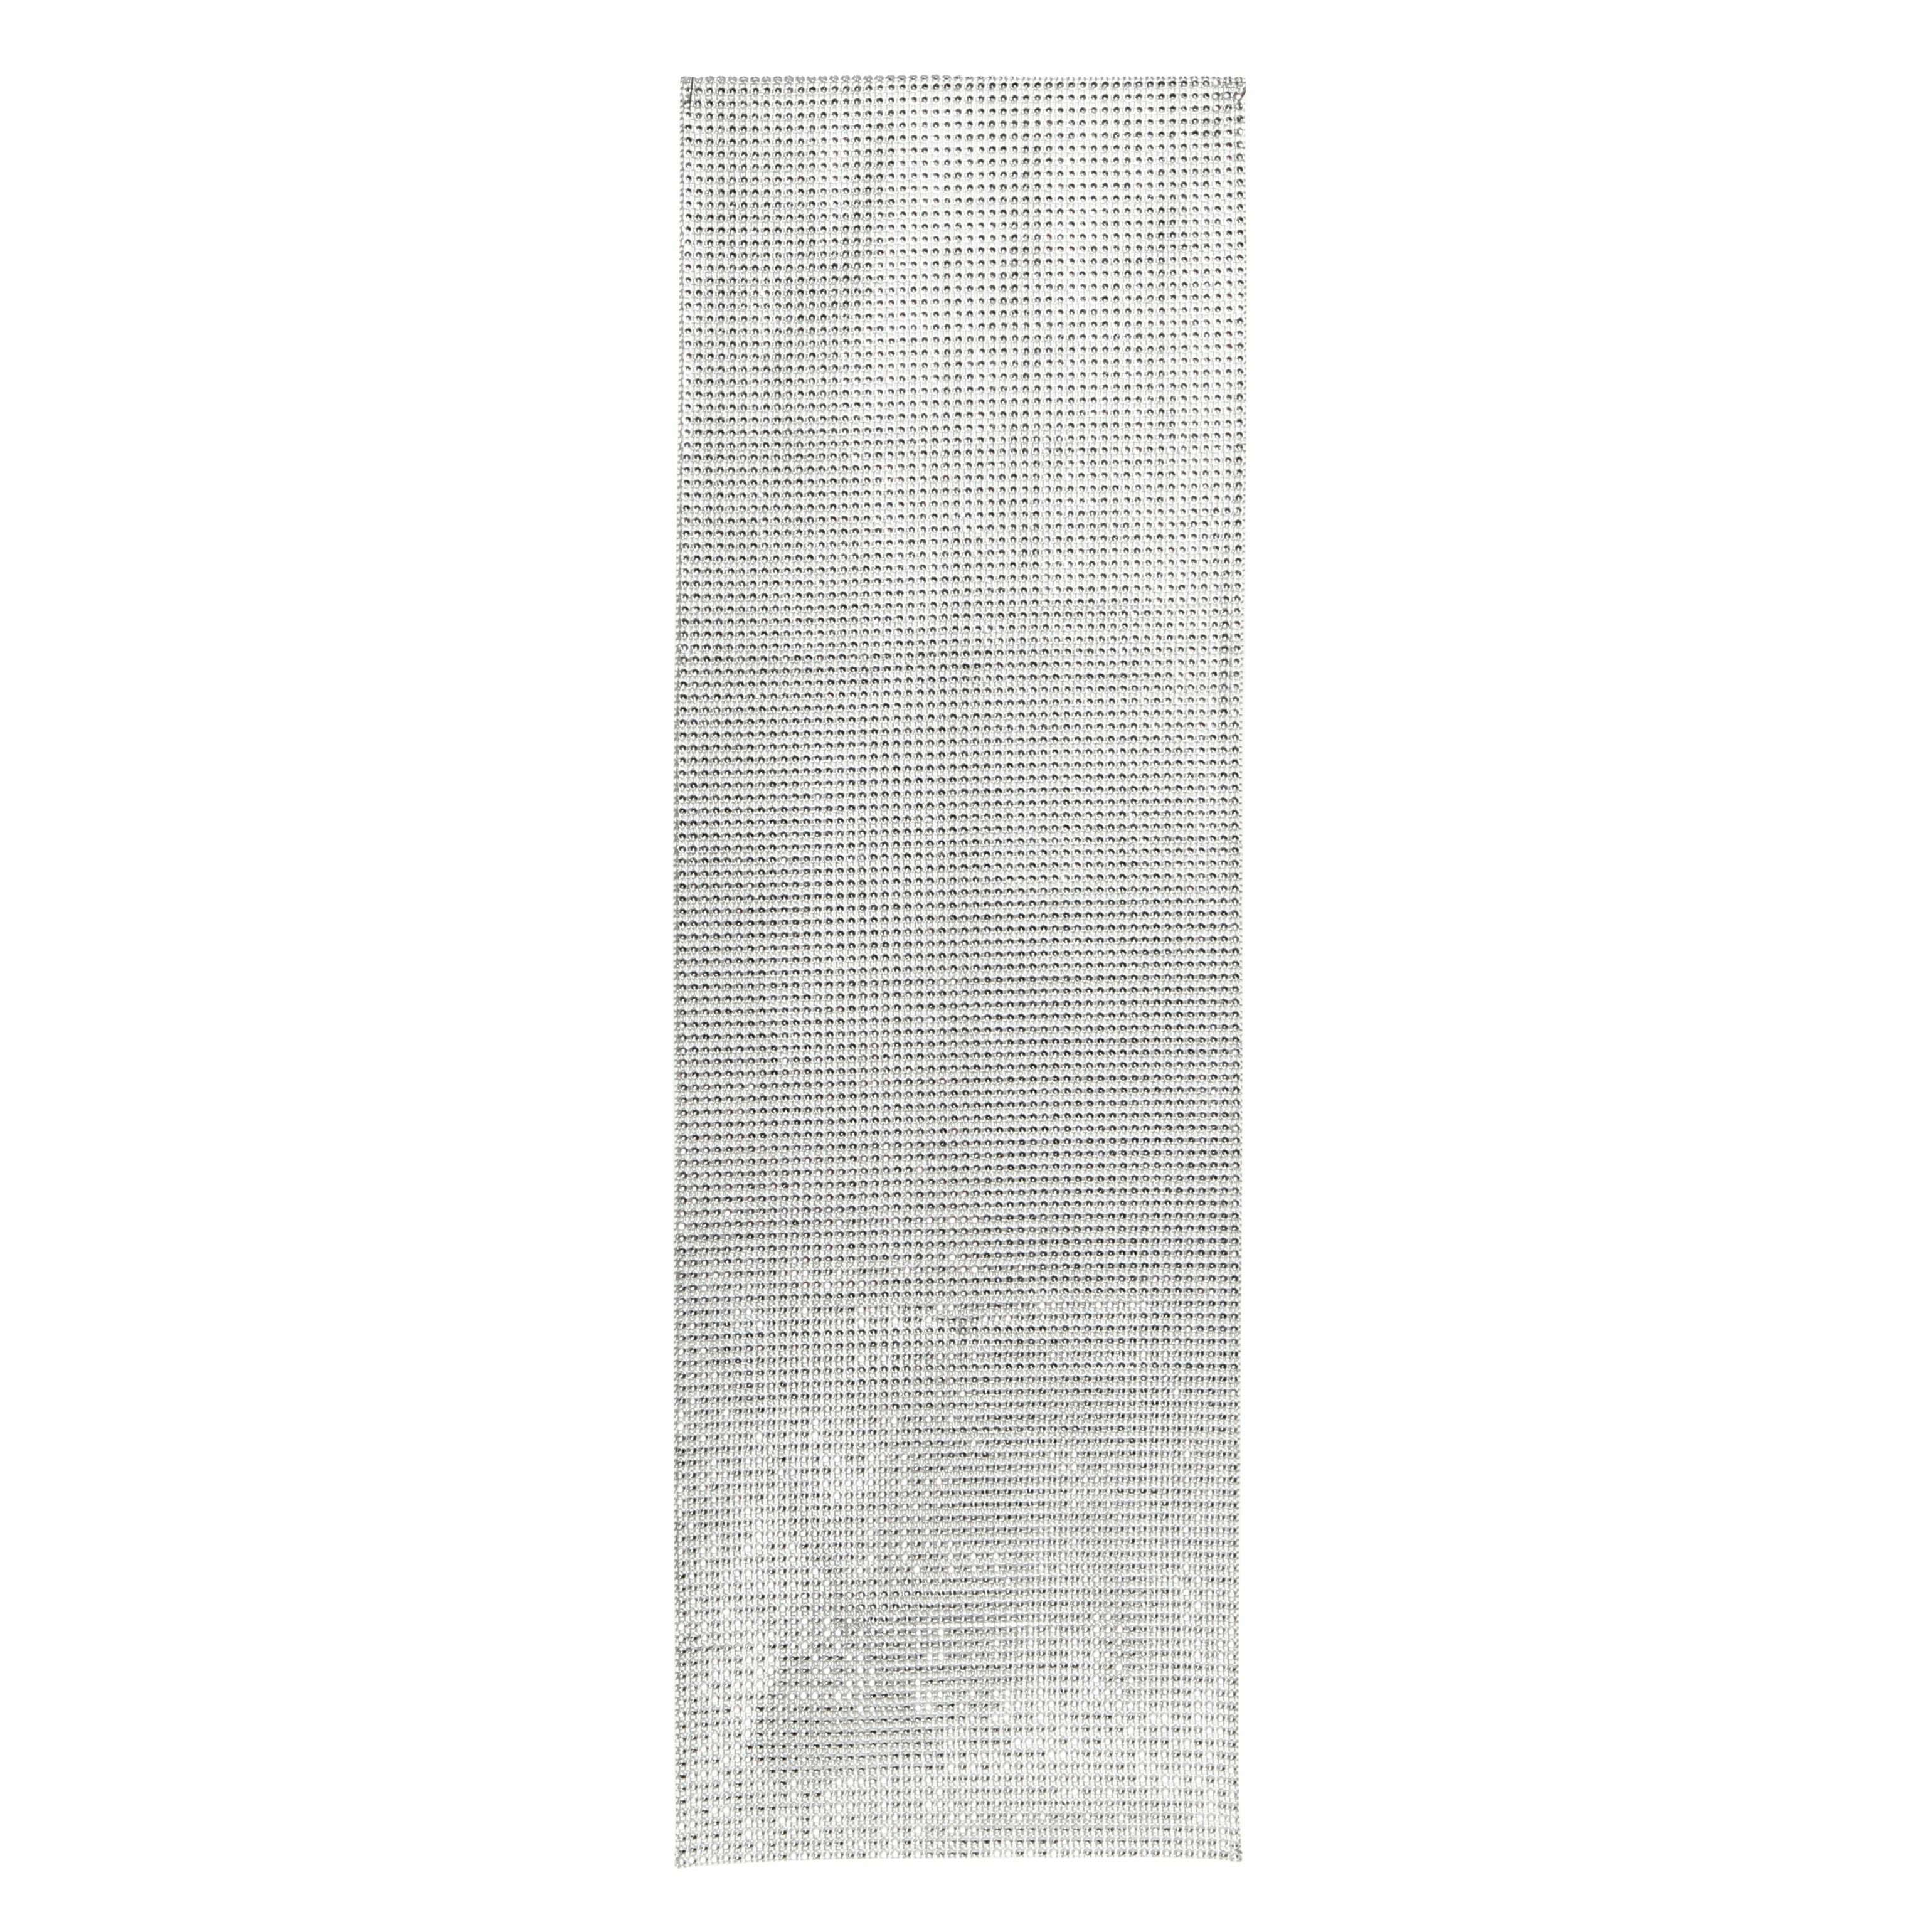 Impodimo Living & Giving:Luxe Diamonte Table Runner - Silver:Swing Gifts